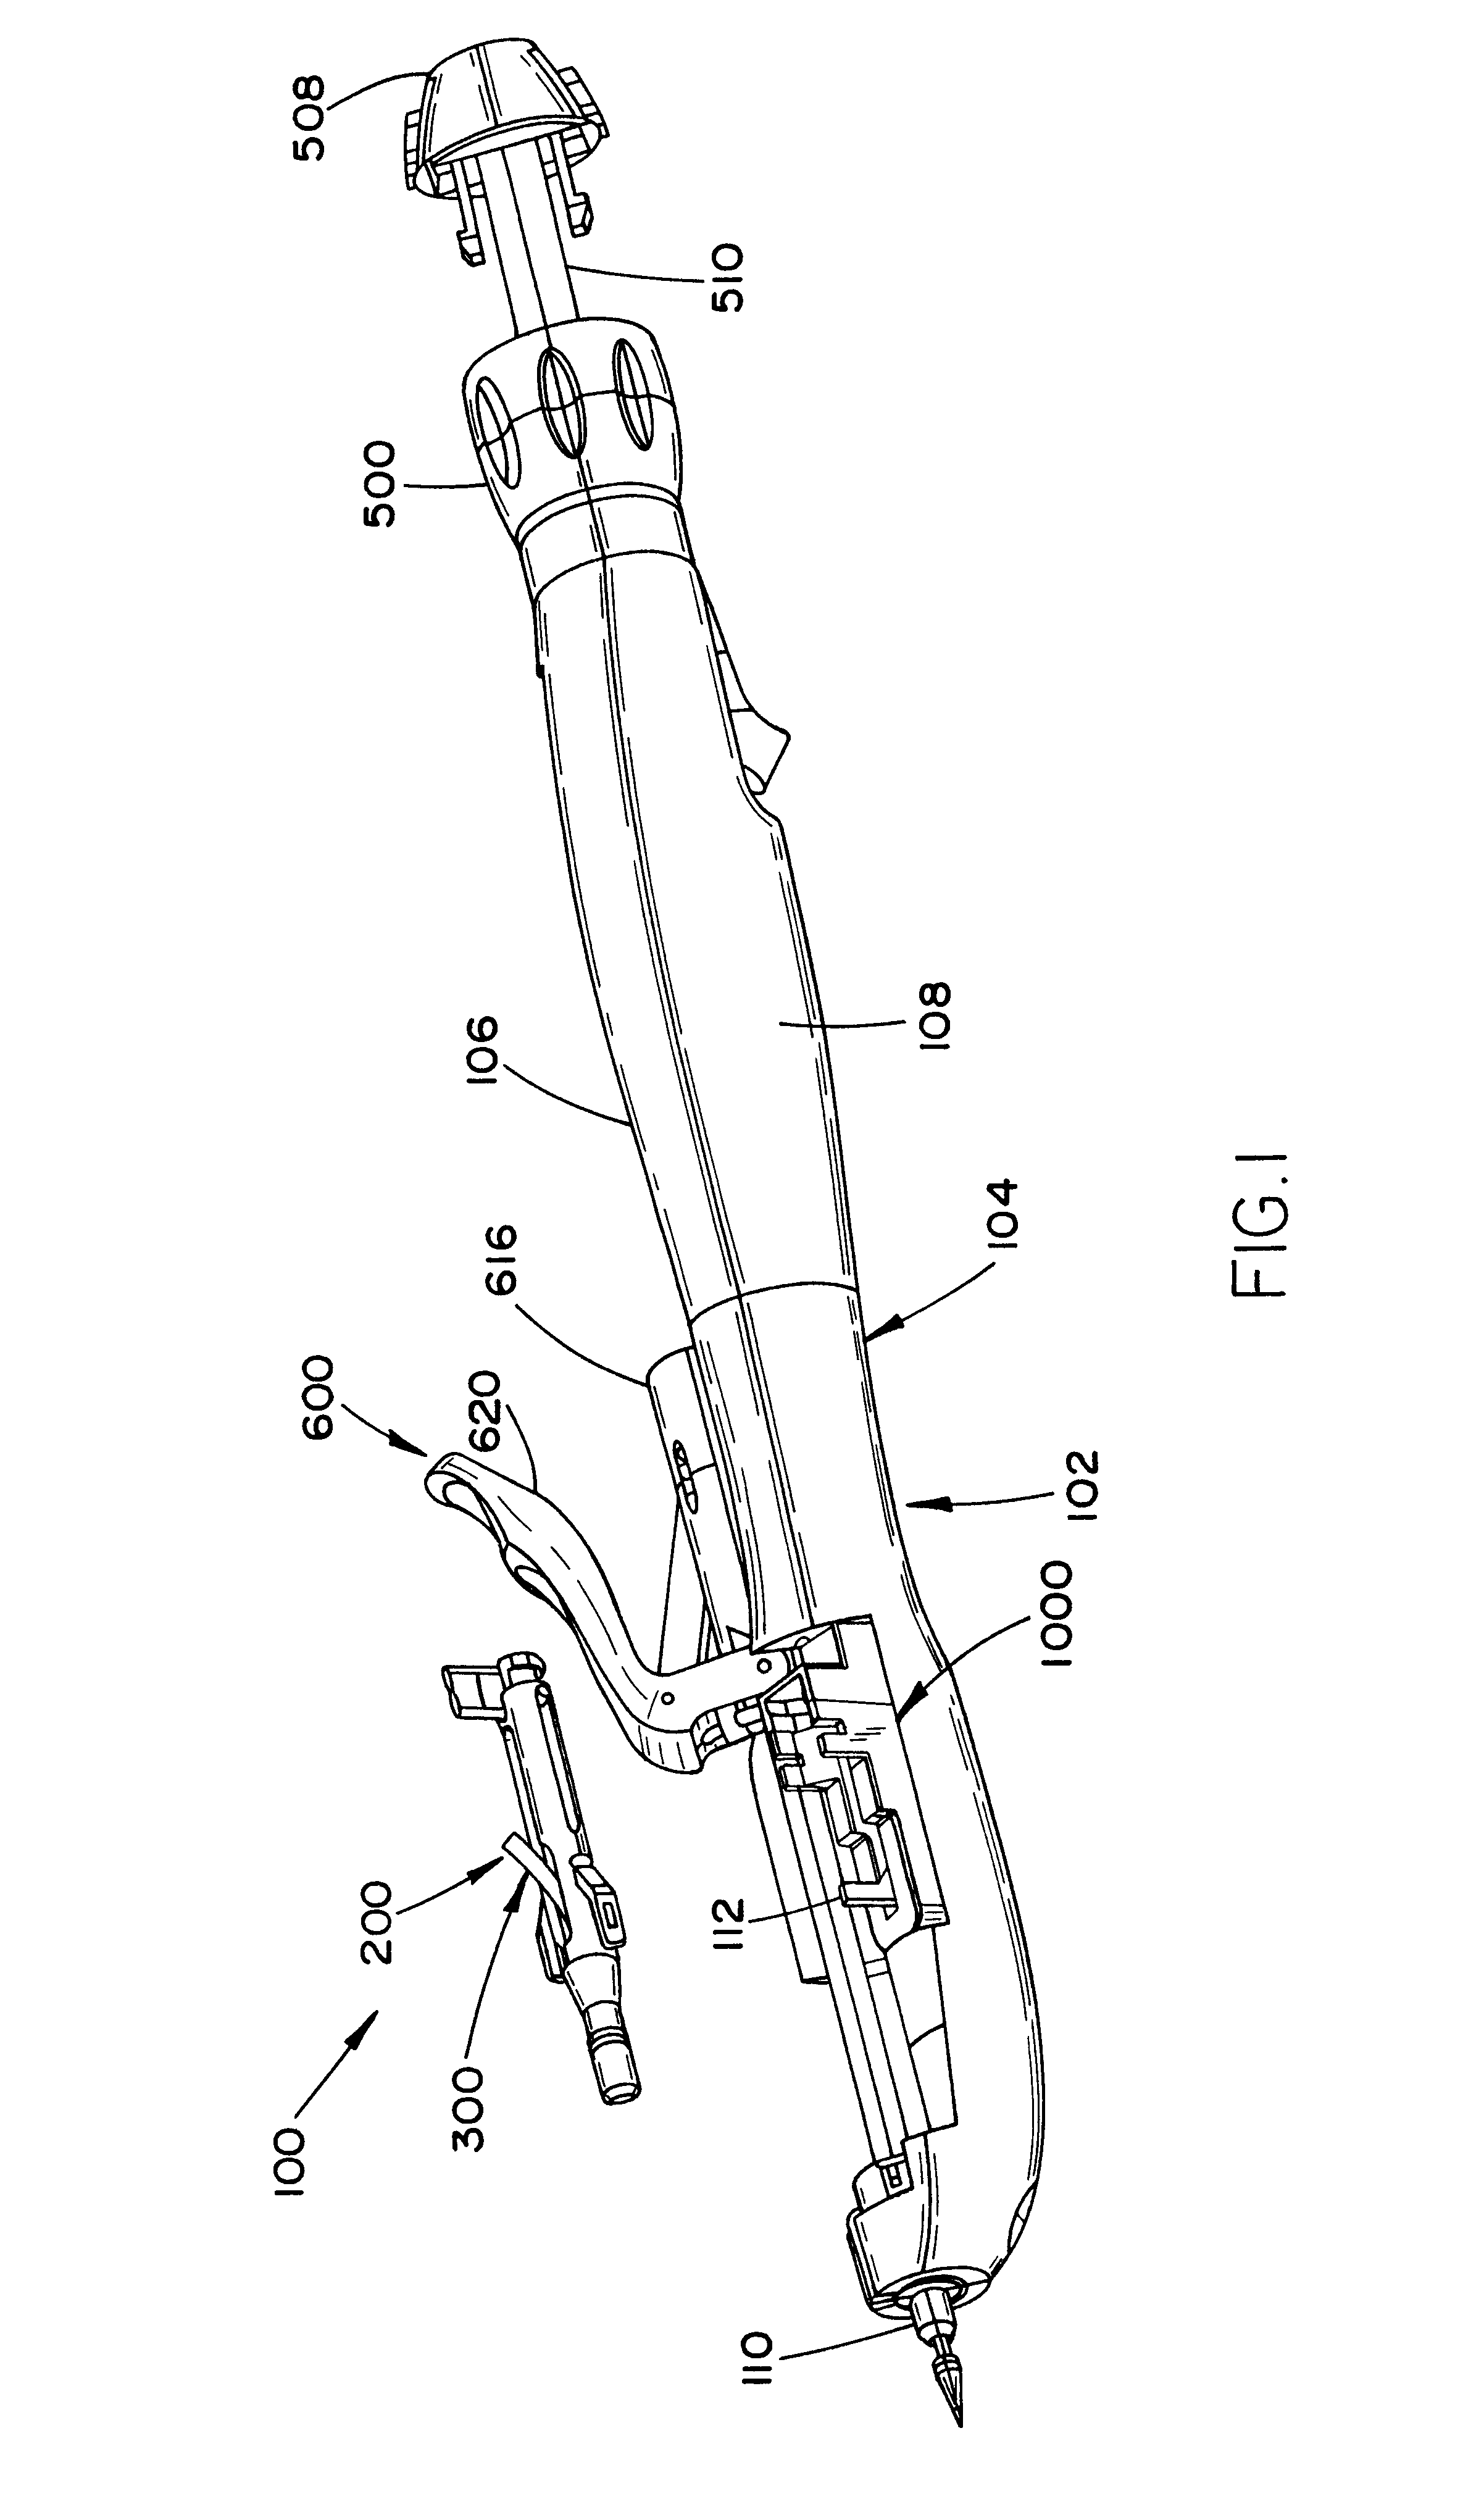 Surgical device for creating an anastomosis between first and second hollow organs